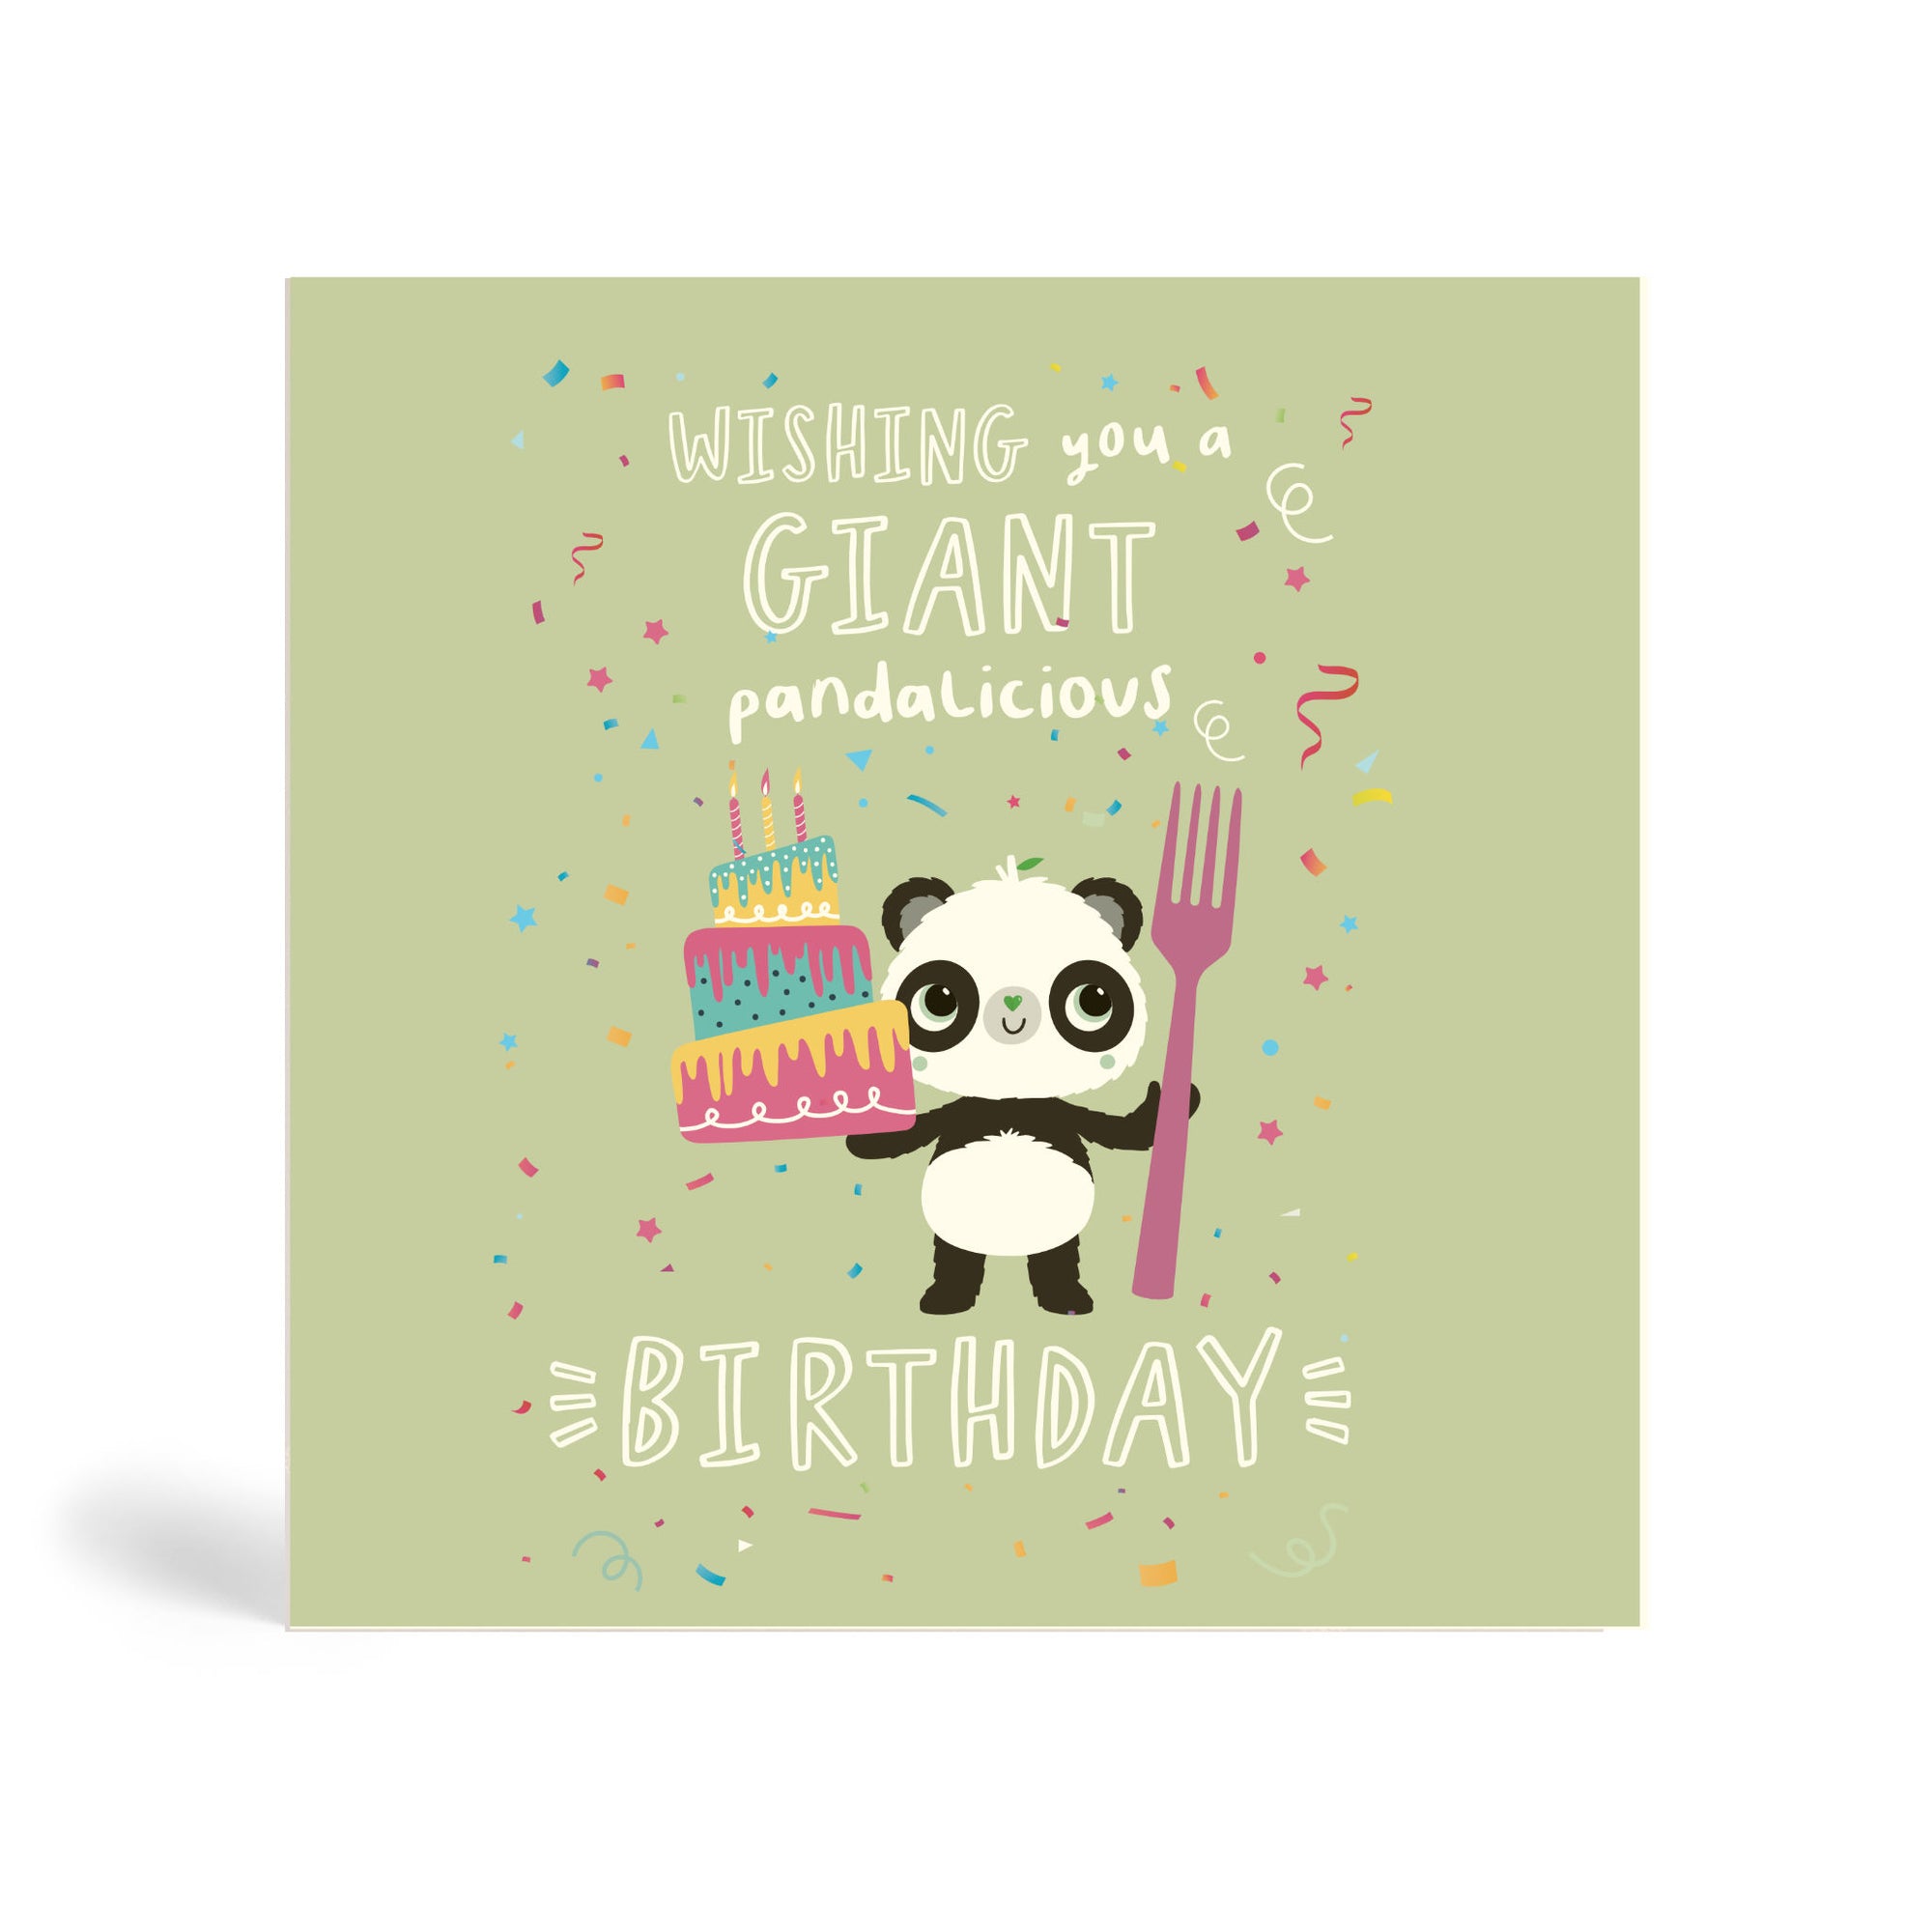 150mm square eco-friendly, tree free, green background wishing you a Giant Pandalicious Birthday greeting with Panda holding a giant birthday cake and a giant fork with confetti falling down.